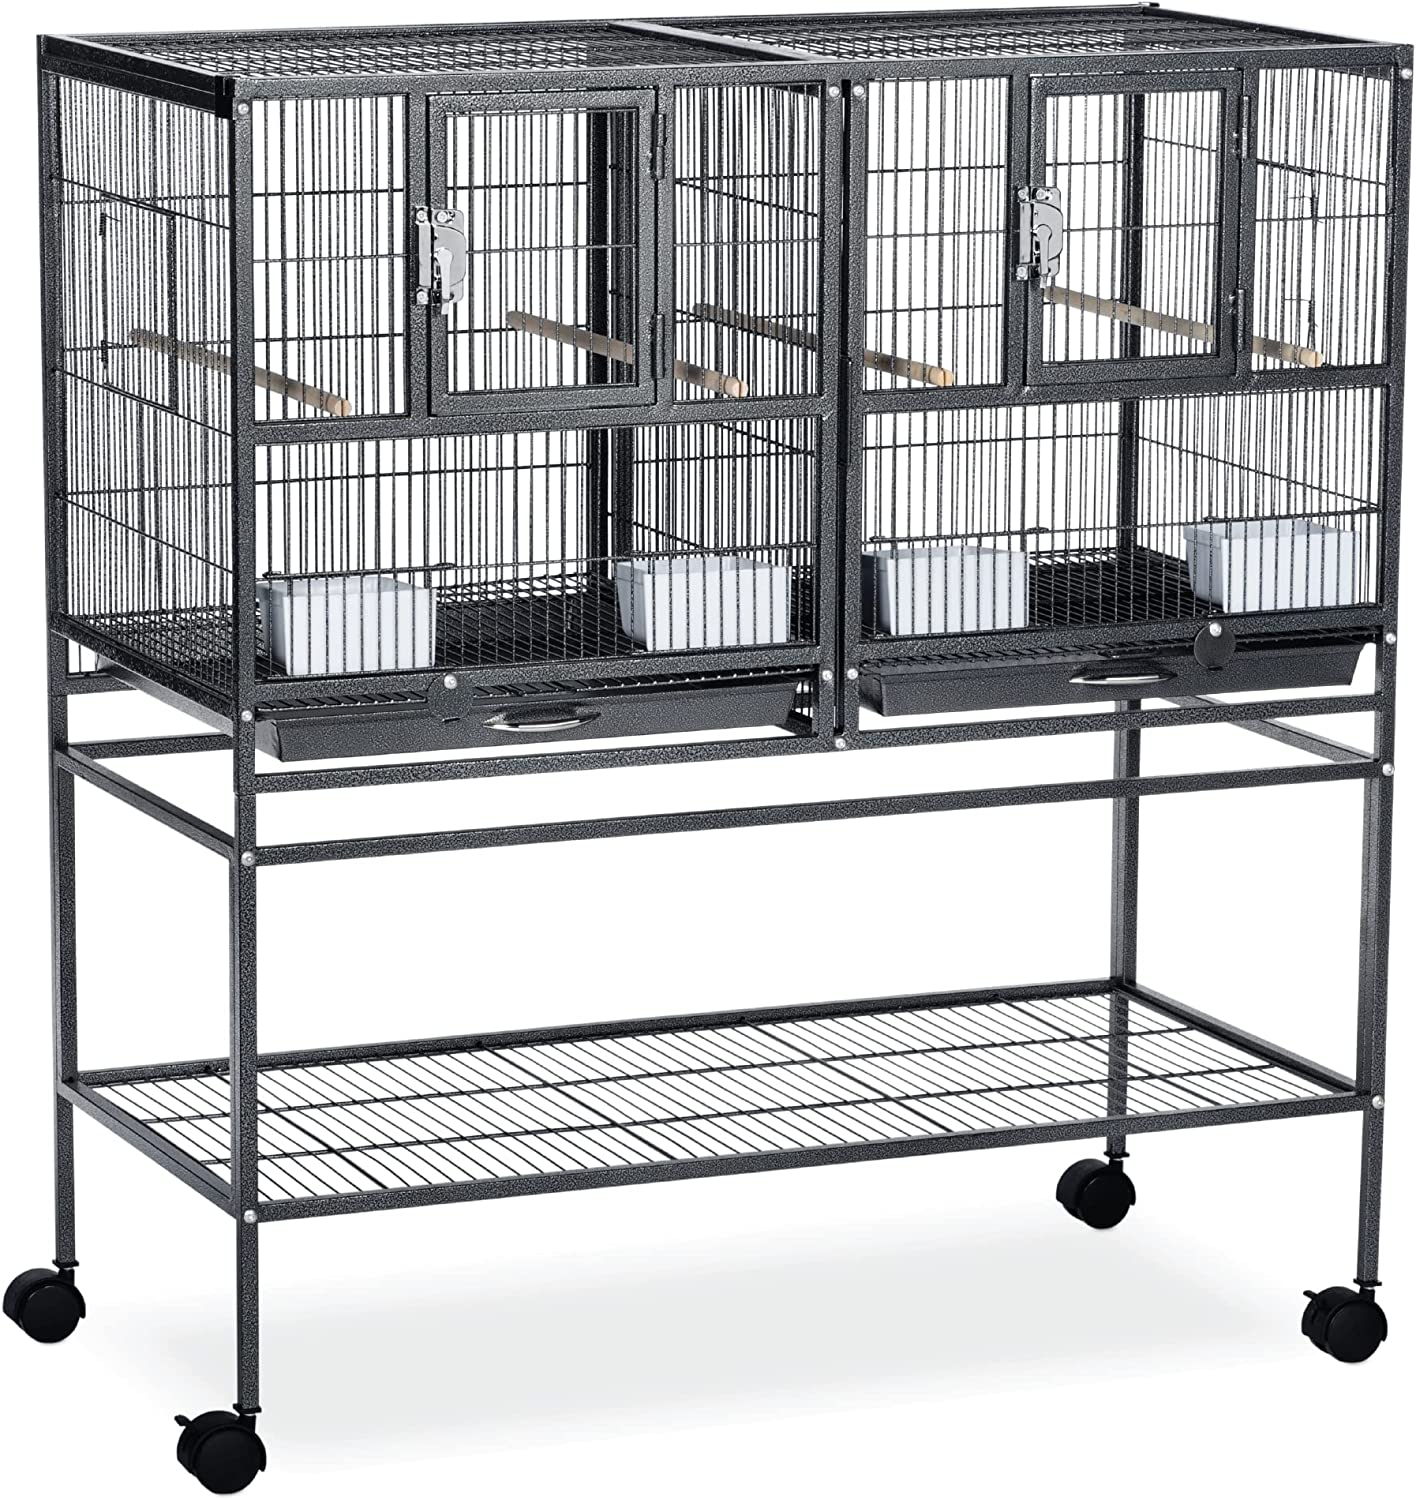 Prevue Pet Products Hampton Deluxe Divided Breeder Bird Cage System with Stand, Stackable Bird Crates for Breeding, Multi-Bird 1 or 2 Cage System, Black Hammertone Finish